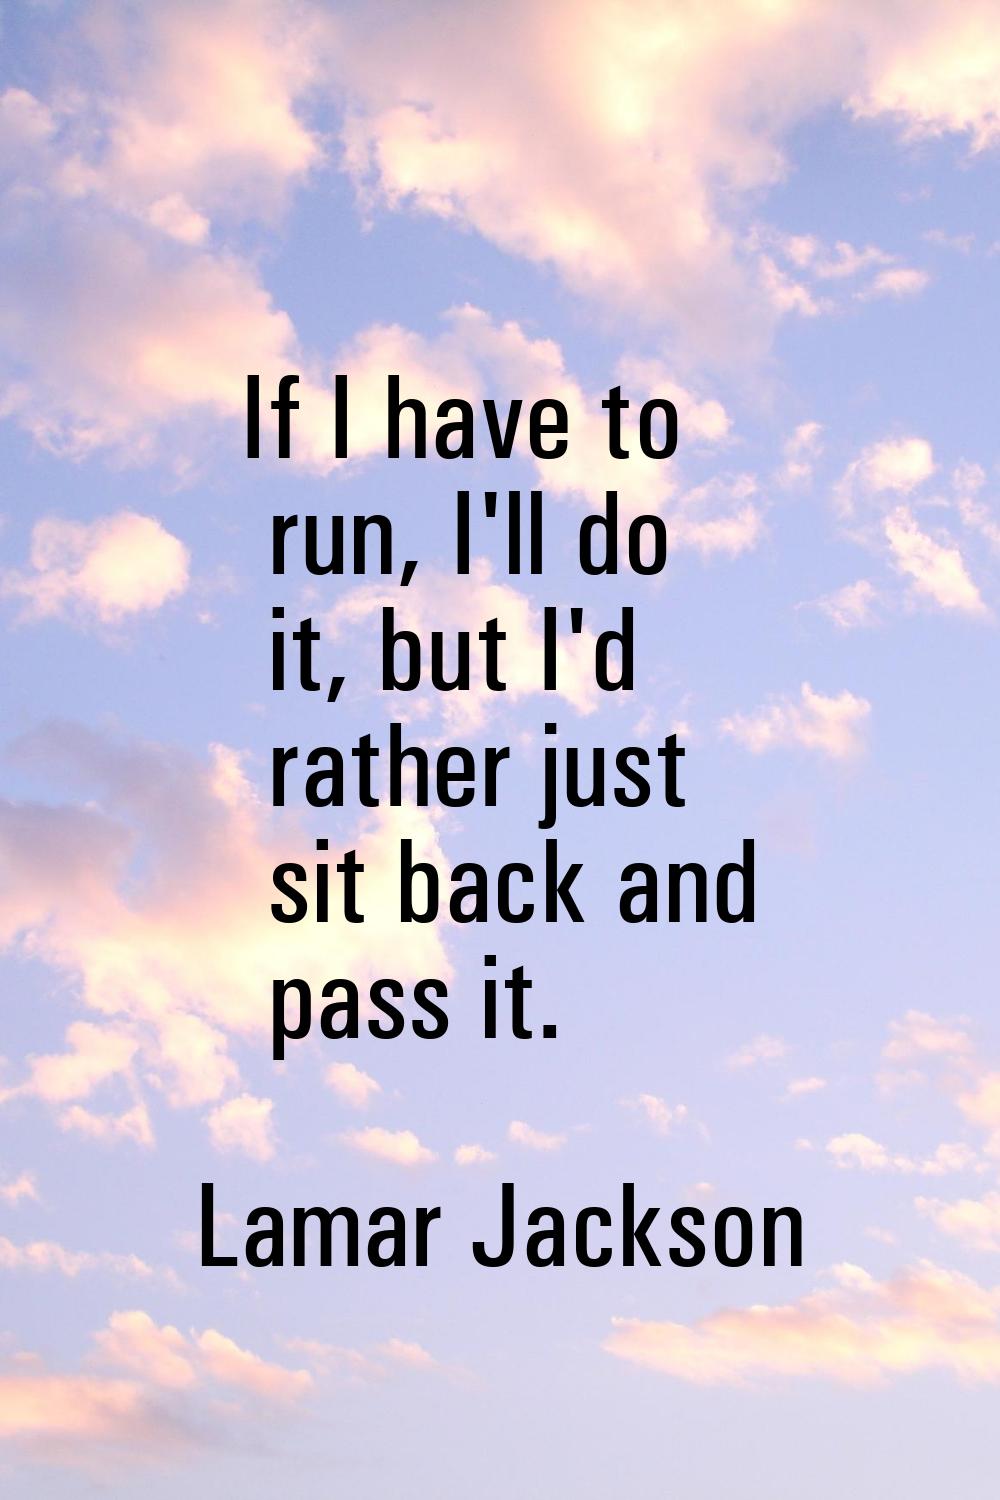 If I have to run, I'll do it, but I'd rather just sit back and pass it.